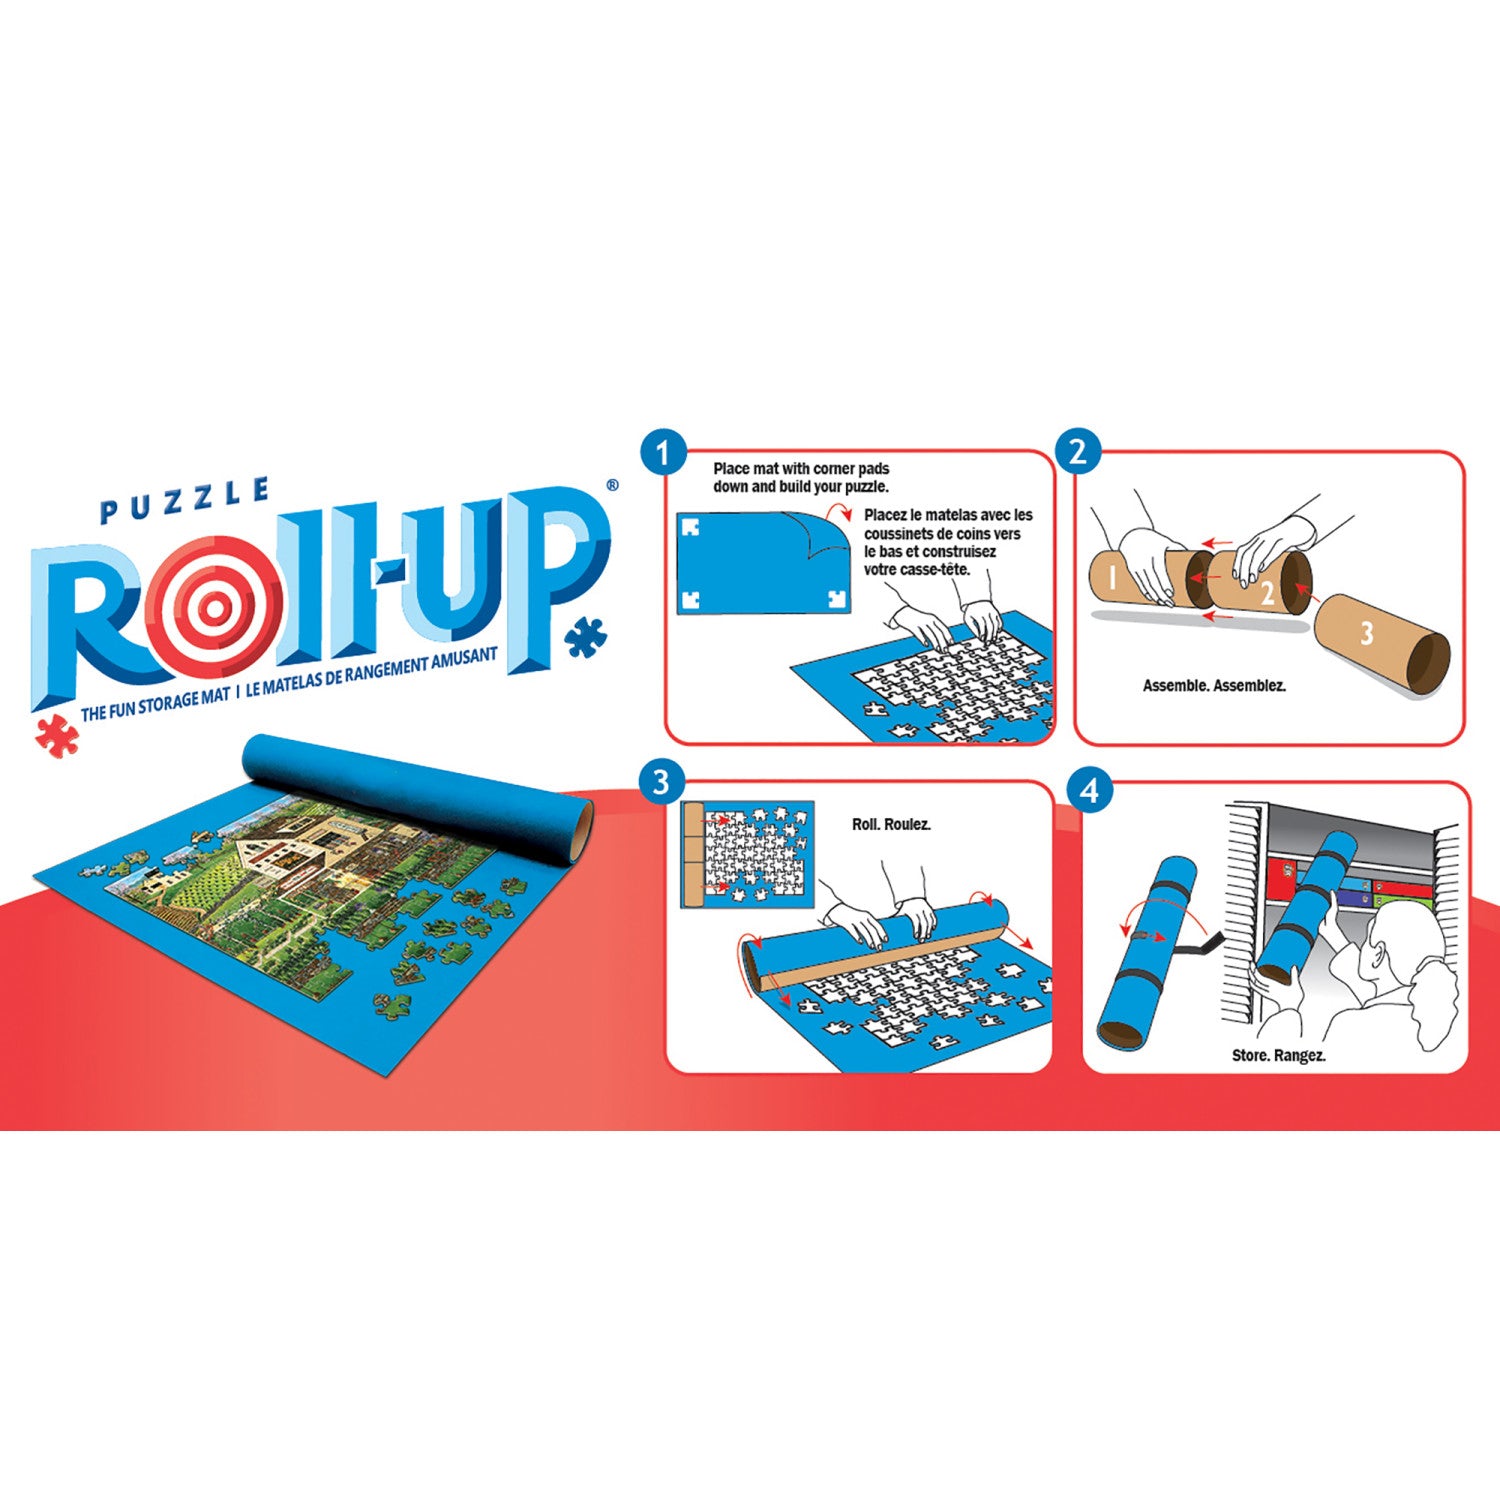 Jigsaw Puzzle Roll Up - 30"x36"